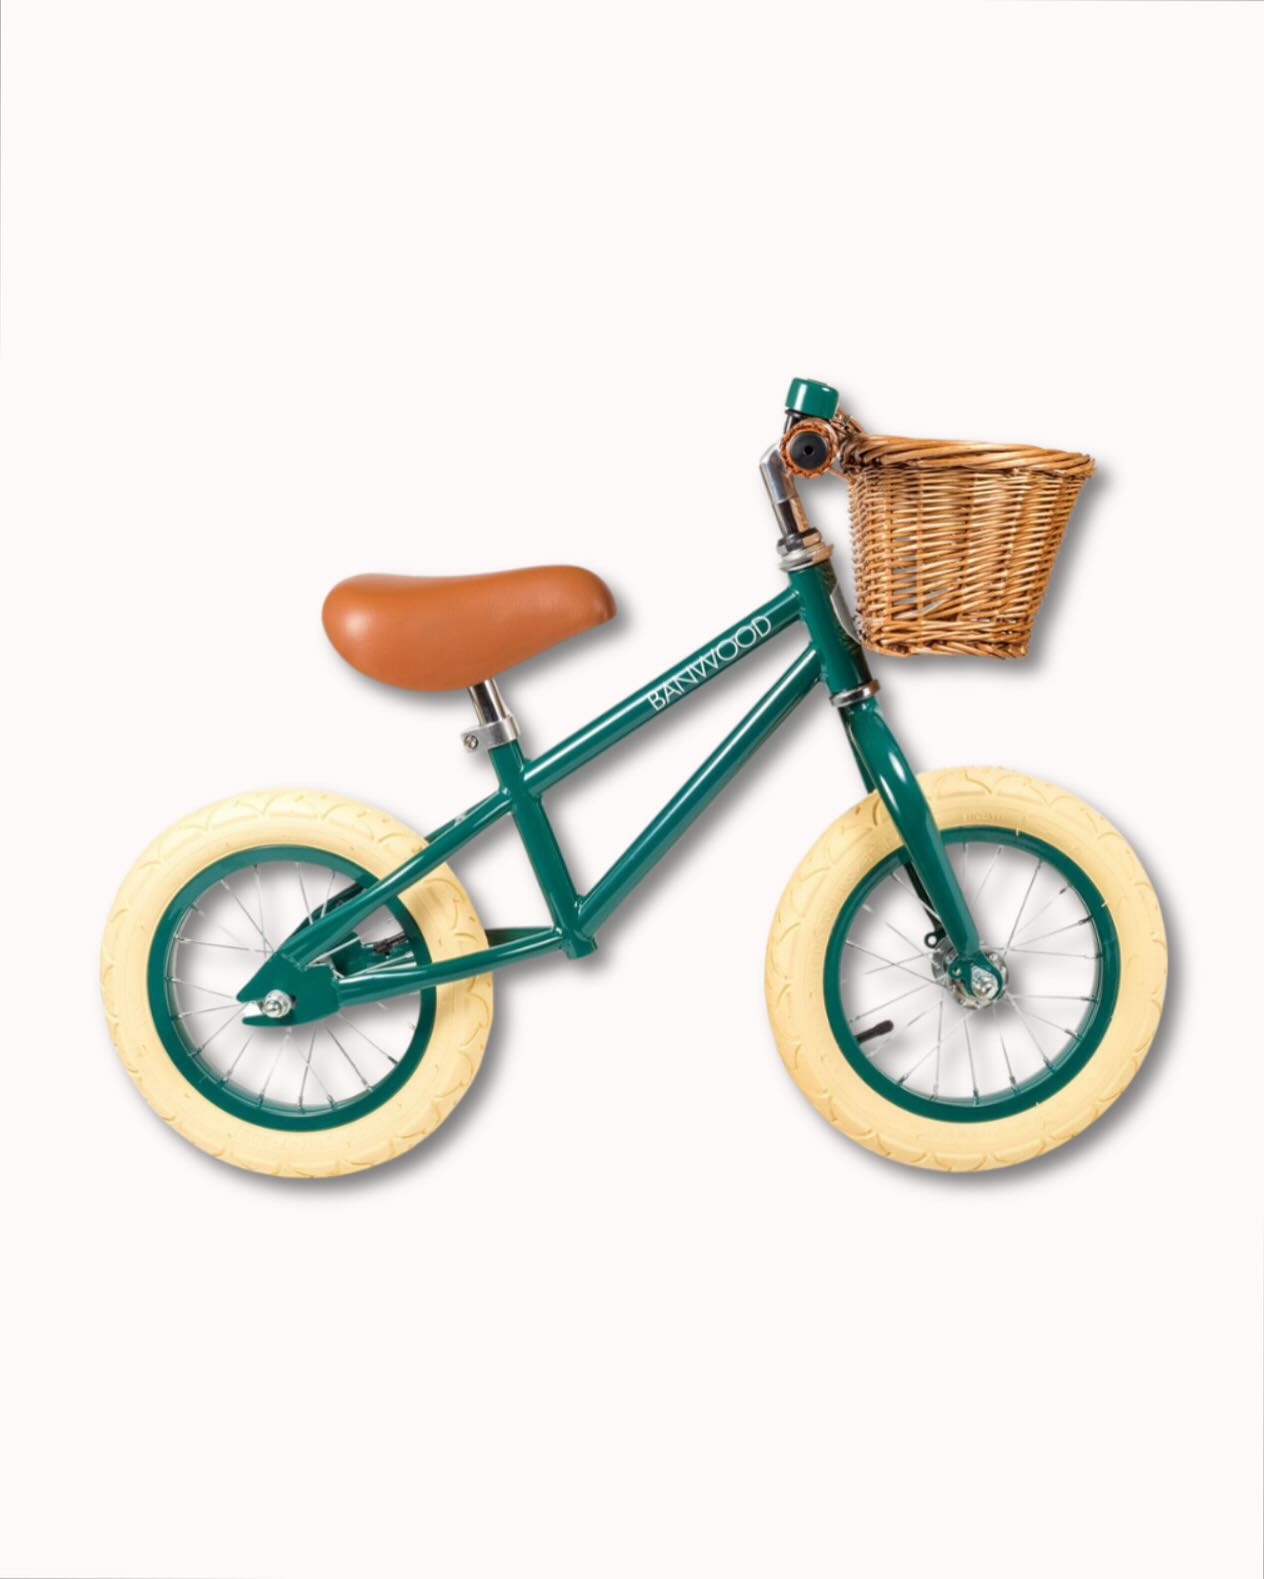 Our balance bike is perfect for building your kids confidence and skills needed to ride a traditional pedal bike. Suitable for kids 2+Shop now at #banwood.com